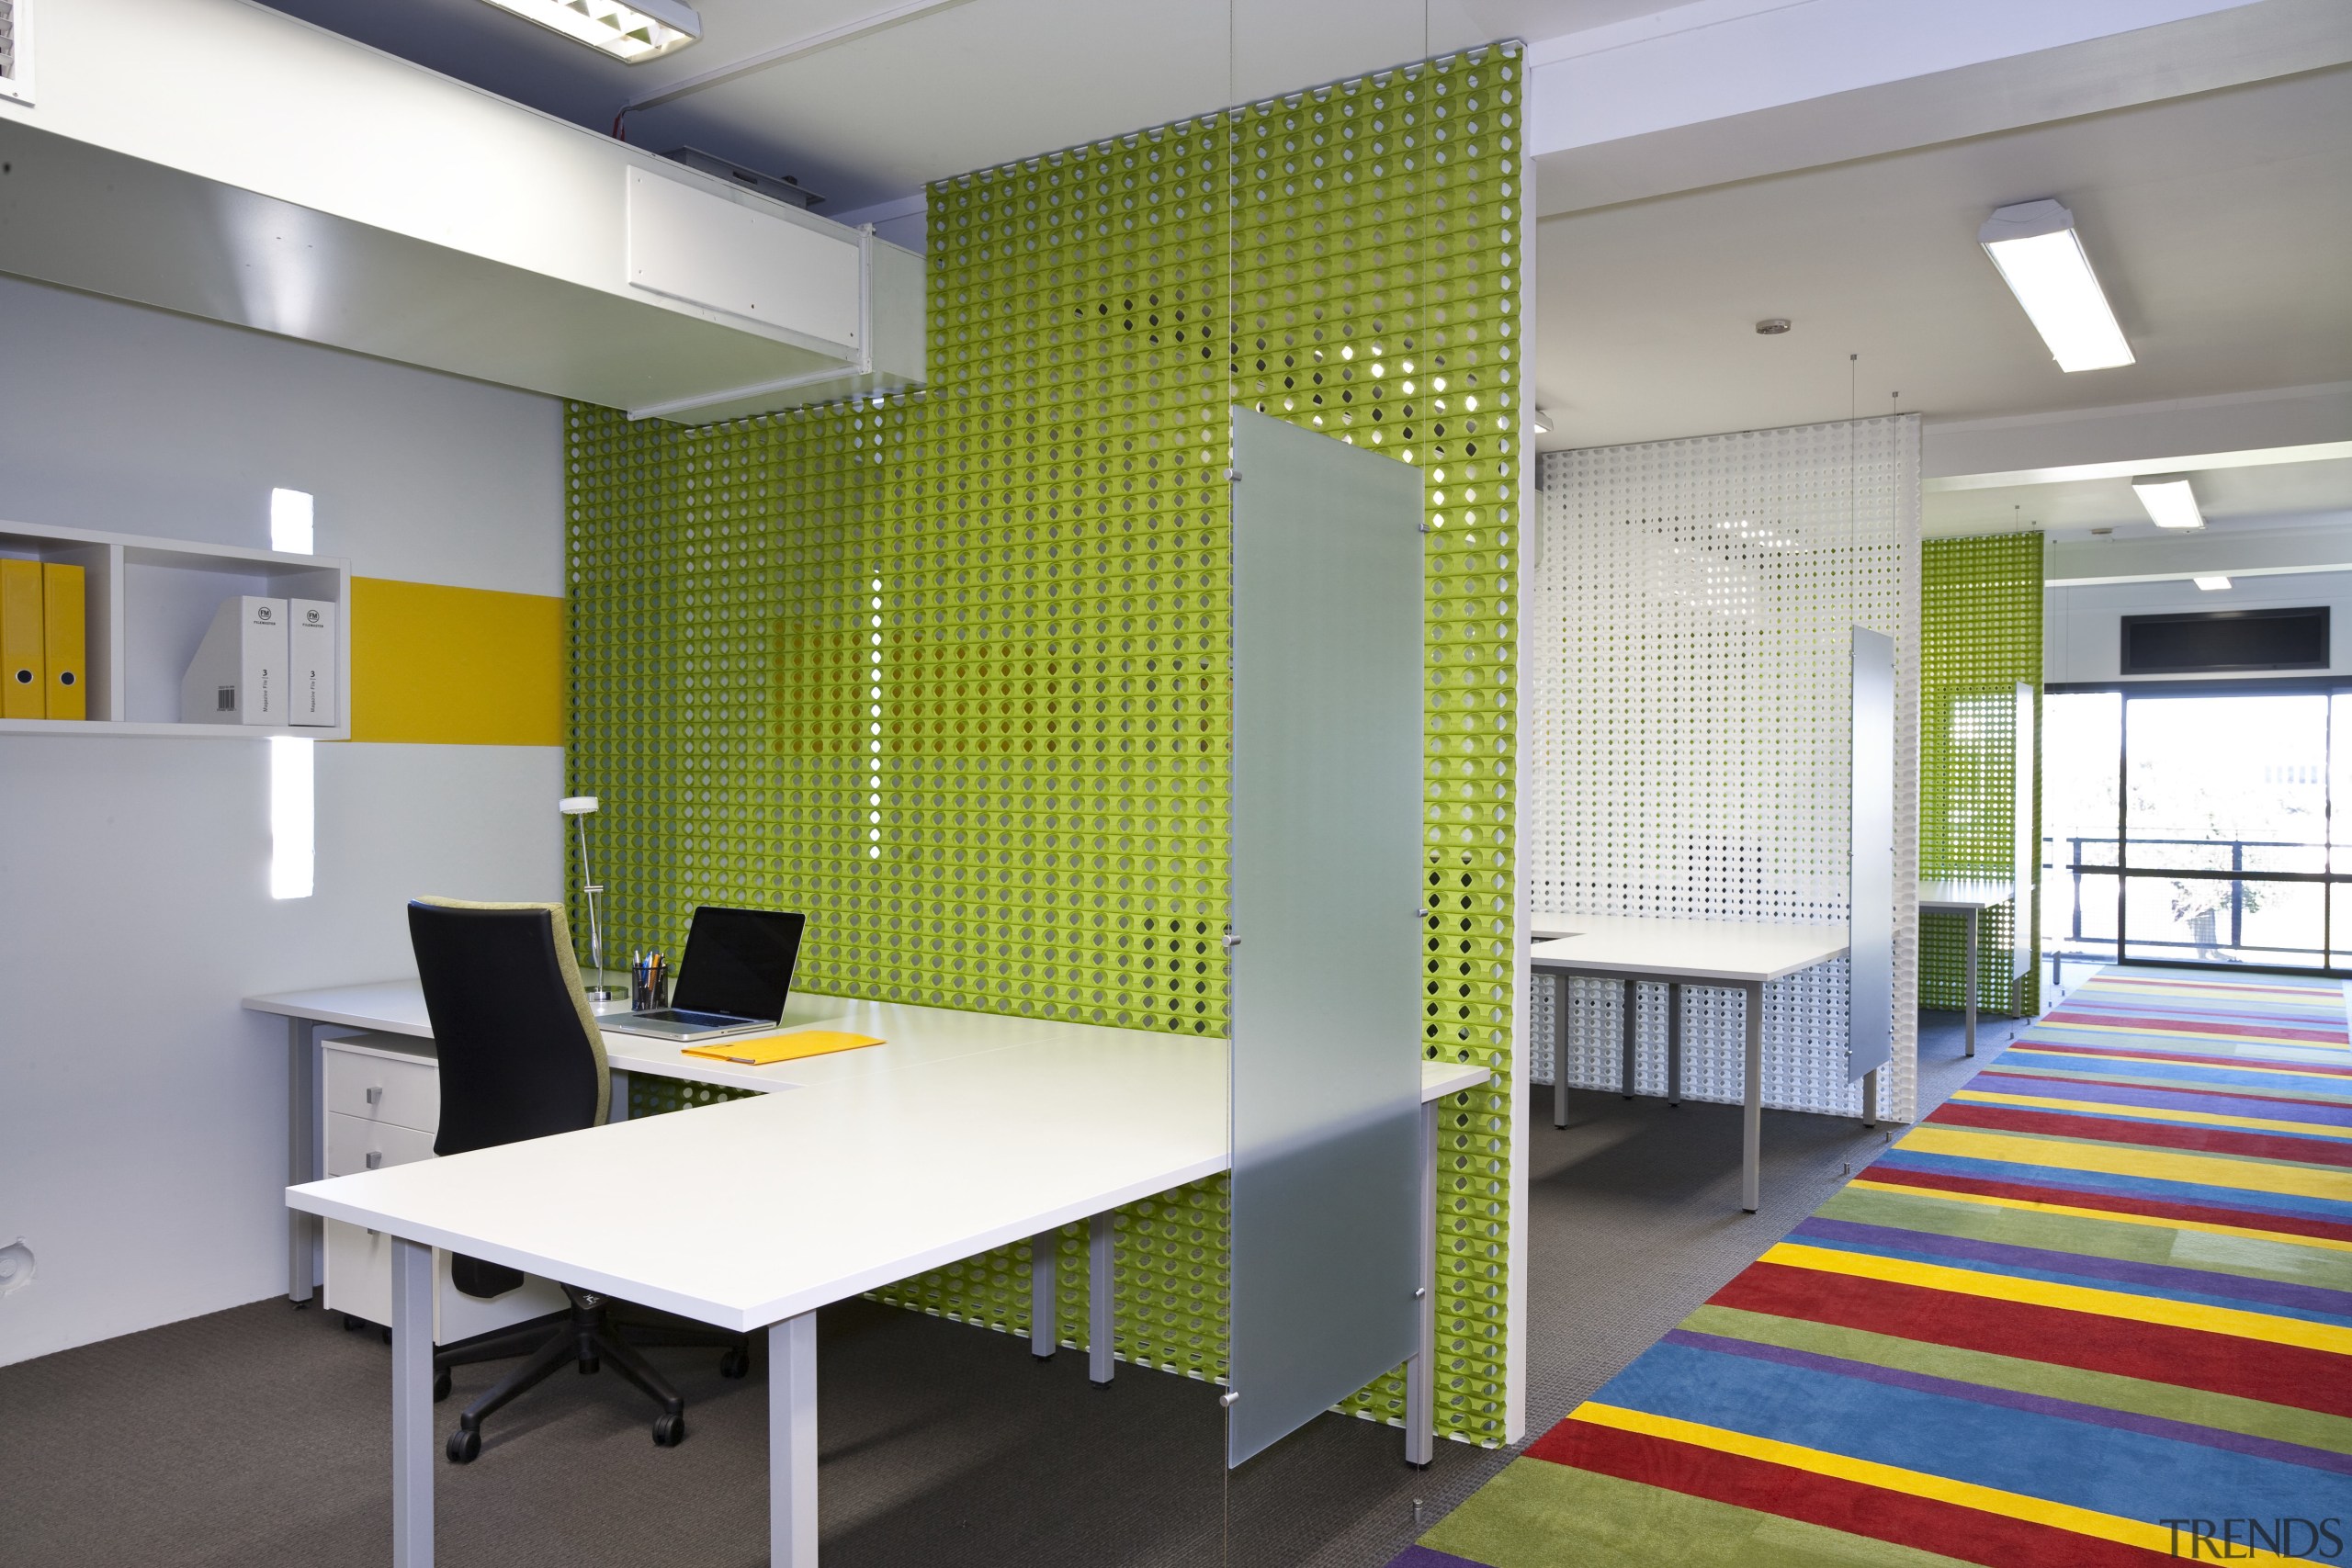 The main office area features colourful interior - architecture, ceiling, interior design, office, product design, wall, gray